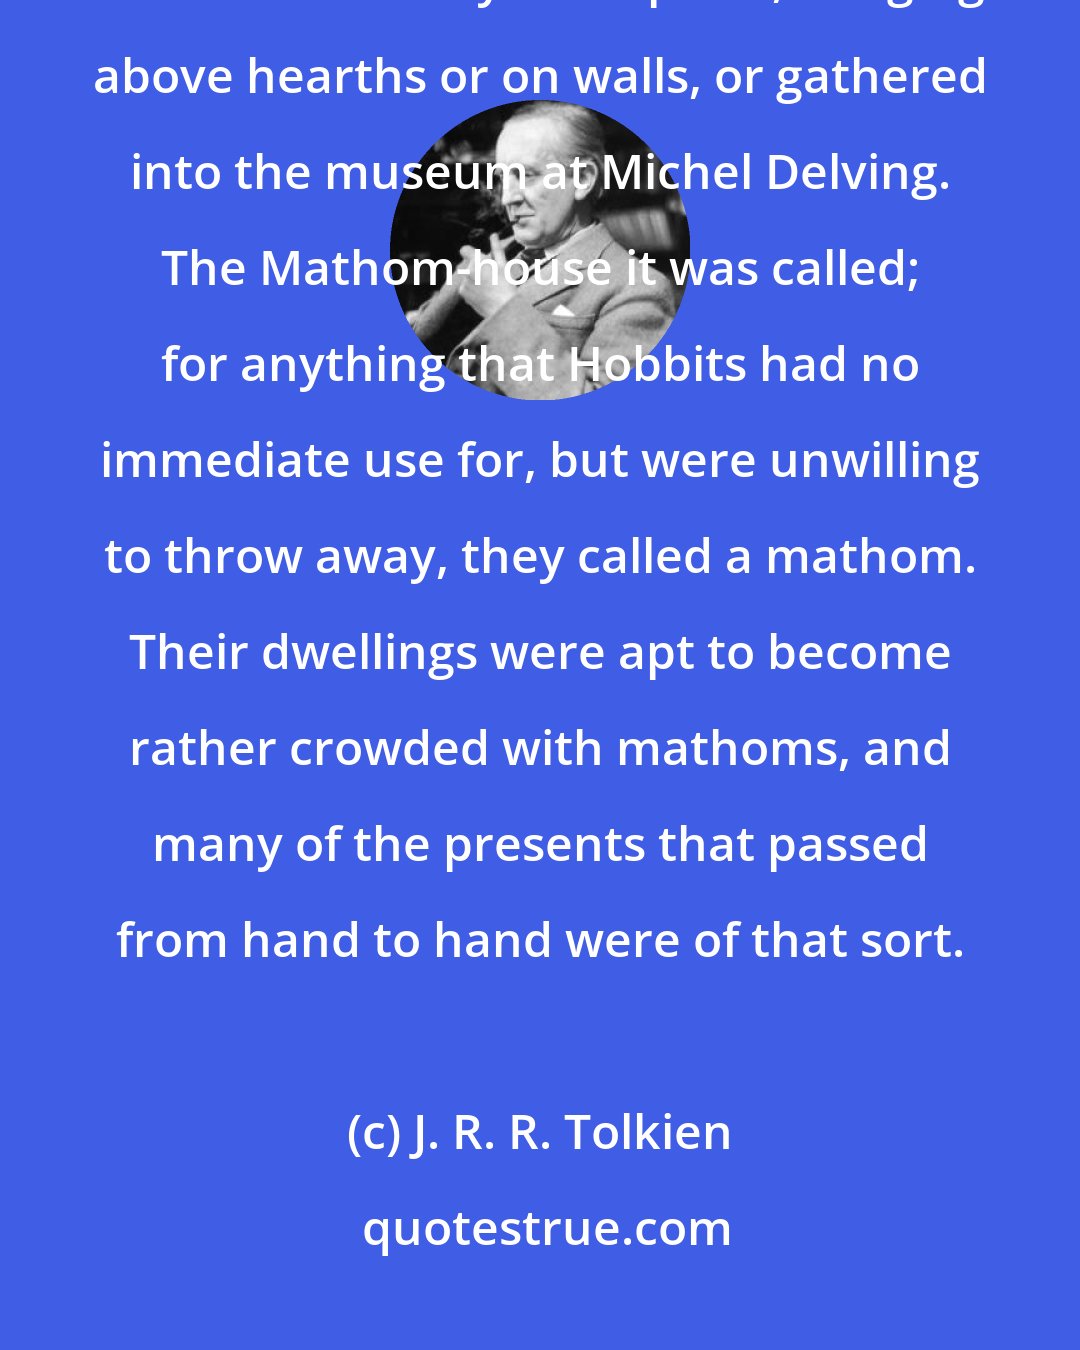 J. R. R. Tolkien: So, though there was still some store of weapons in the Shire, these were used mostly as trophies, hanging above hearths or on walls, or gathered into the museum at Michel Delving. The Mathom-house it was called; for anything that Hobbits had no immediate use for, but were unwilling to throw away, they called a mathom. Their dwellings were apt to become rather crowded with mathoms, and many of the presents that passed from hand to hand were of that sort.